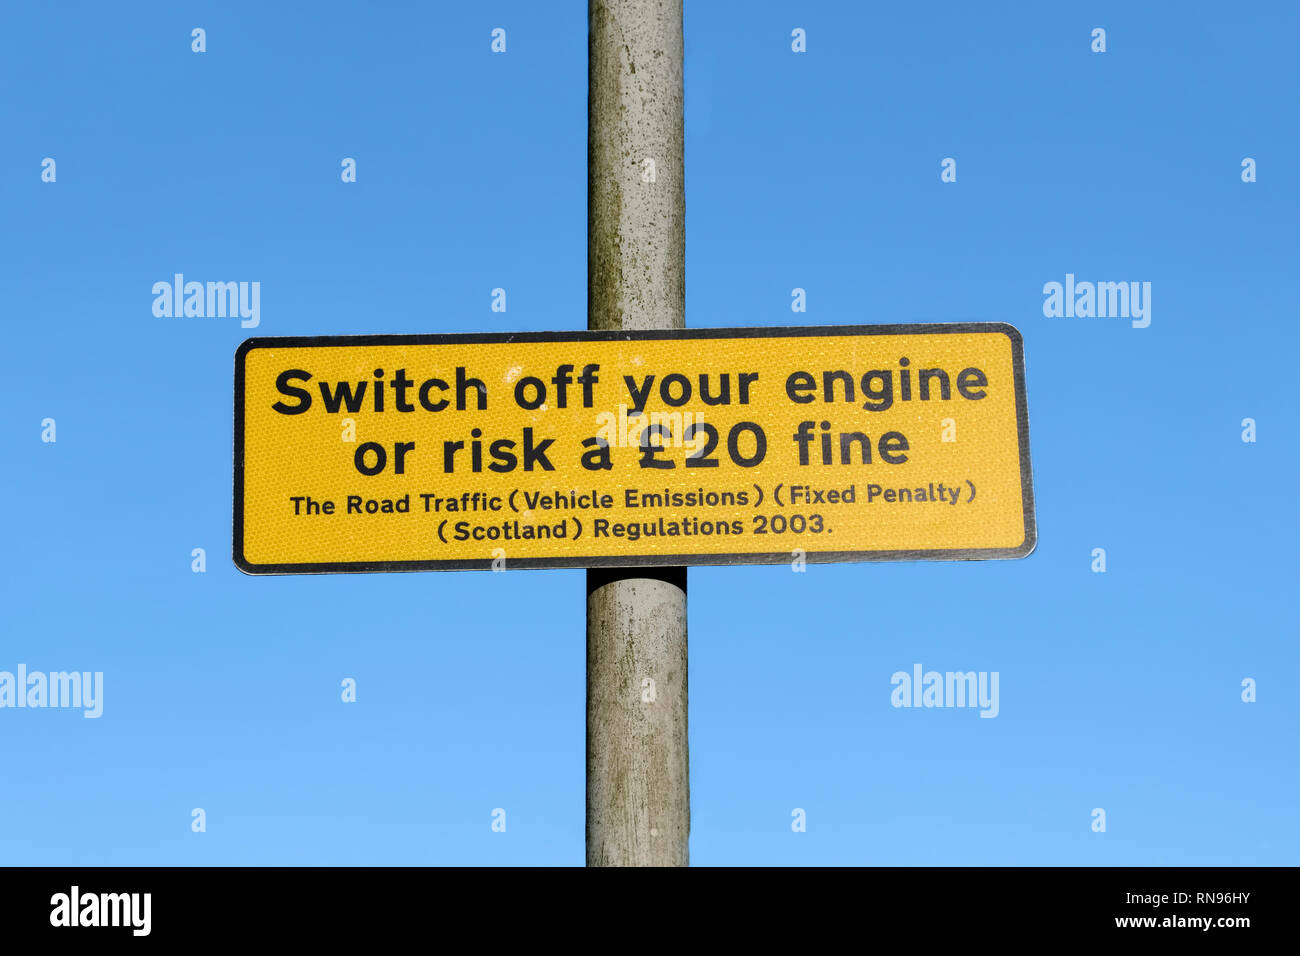 No vehicle idle engine idling fixed penalty fine car emissions pollution act sign Stock Photo